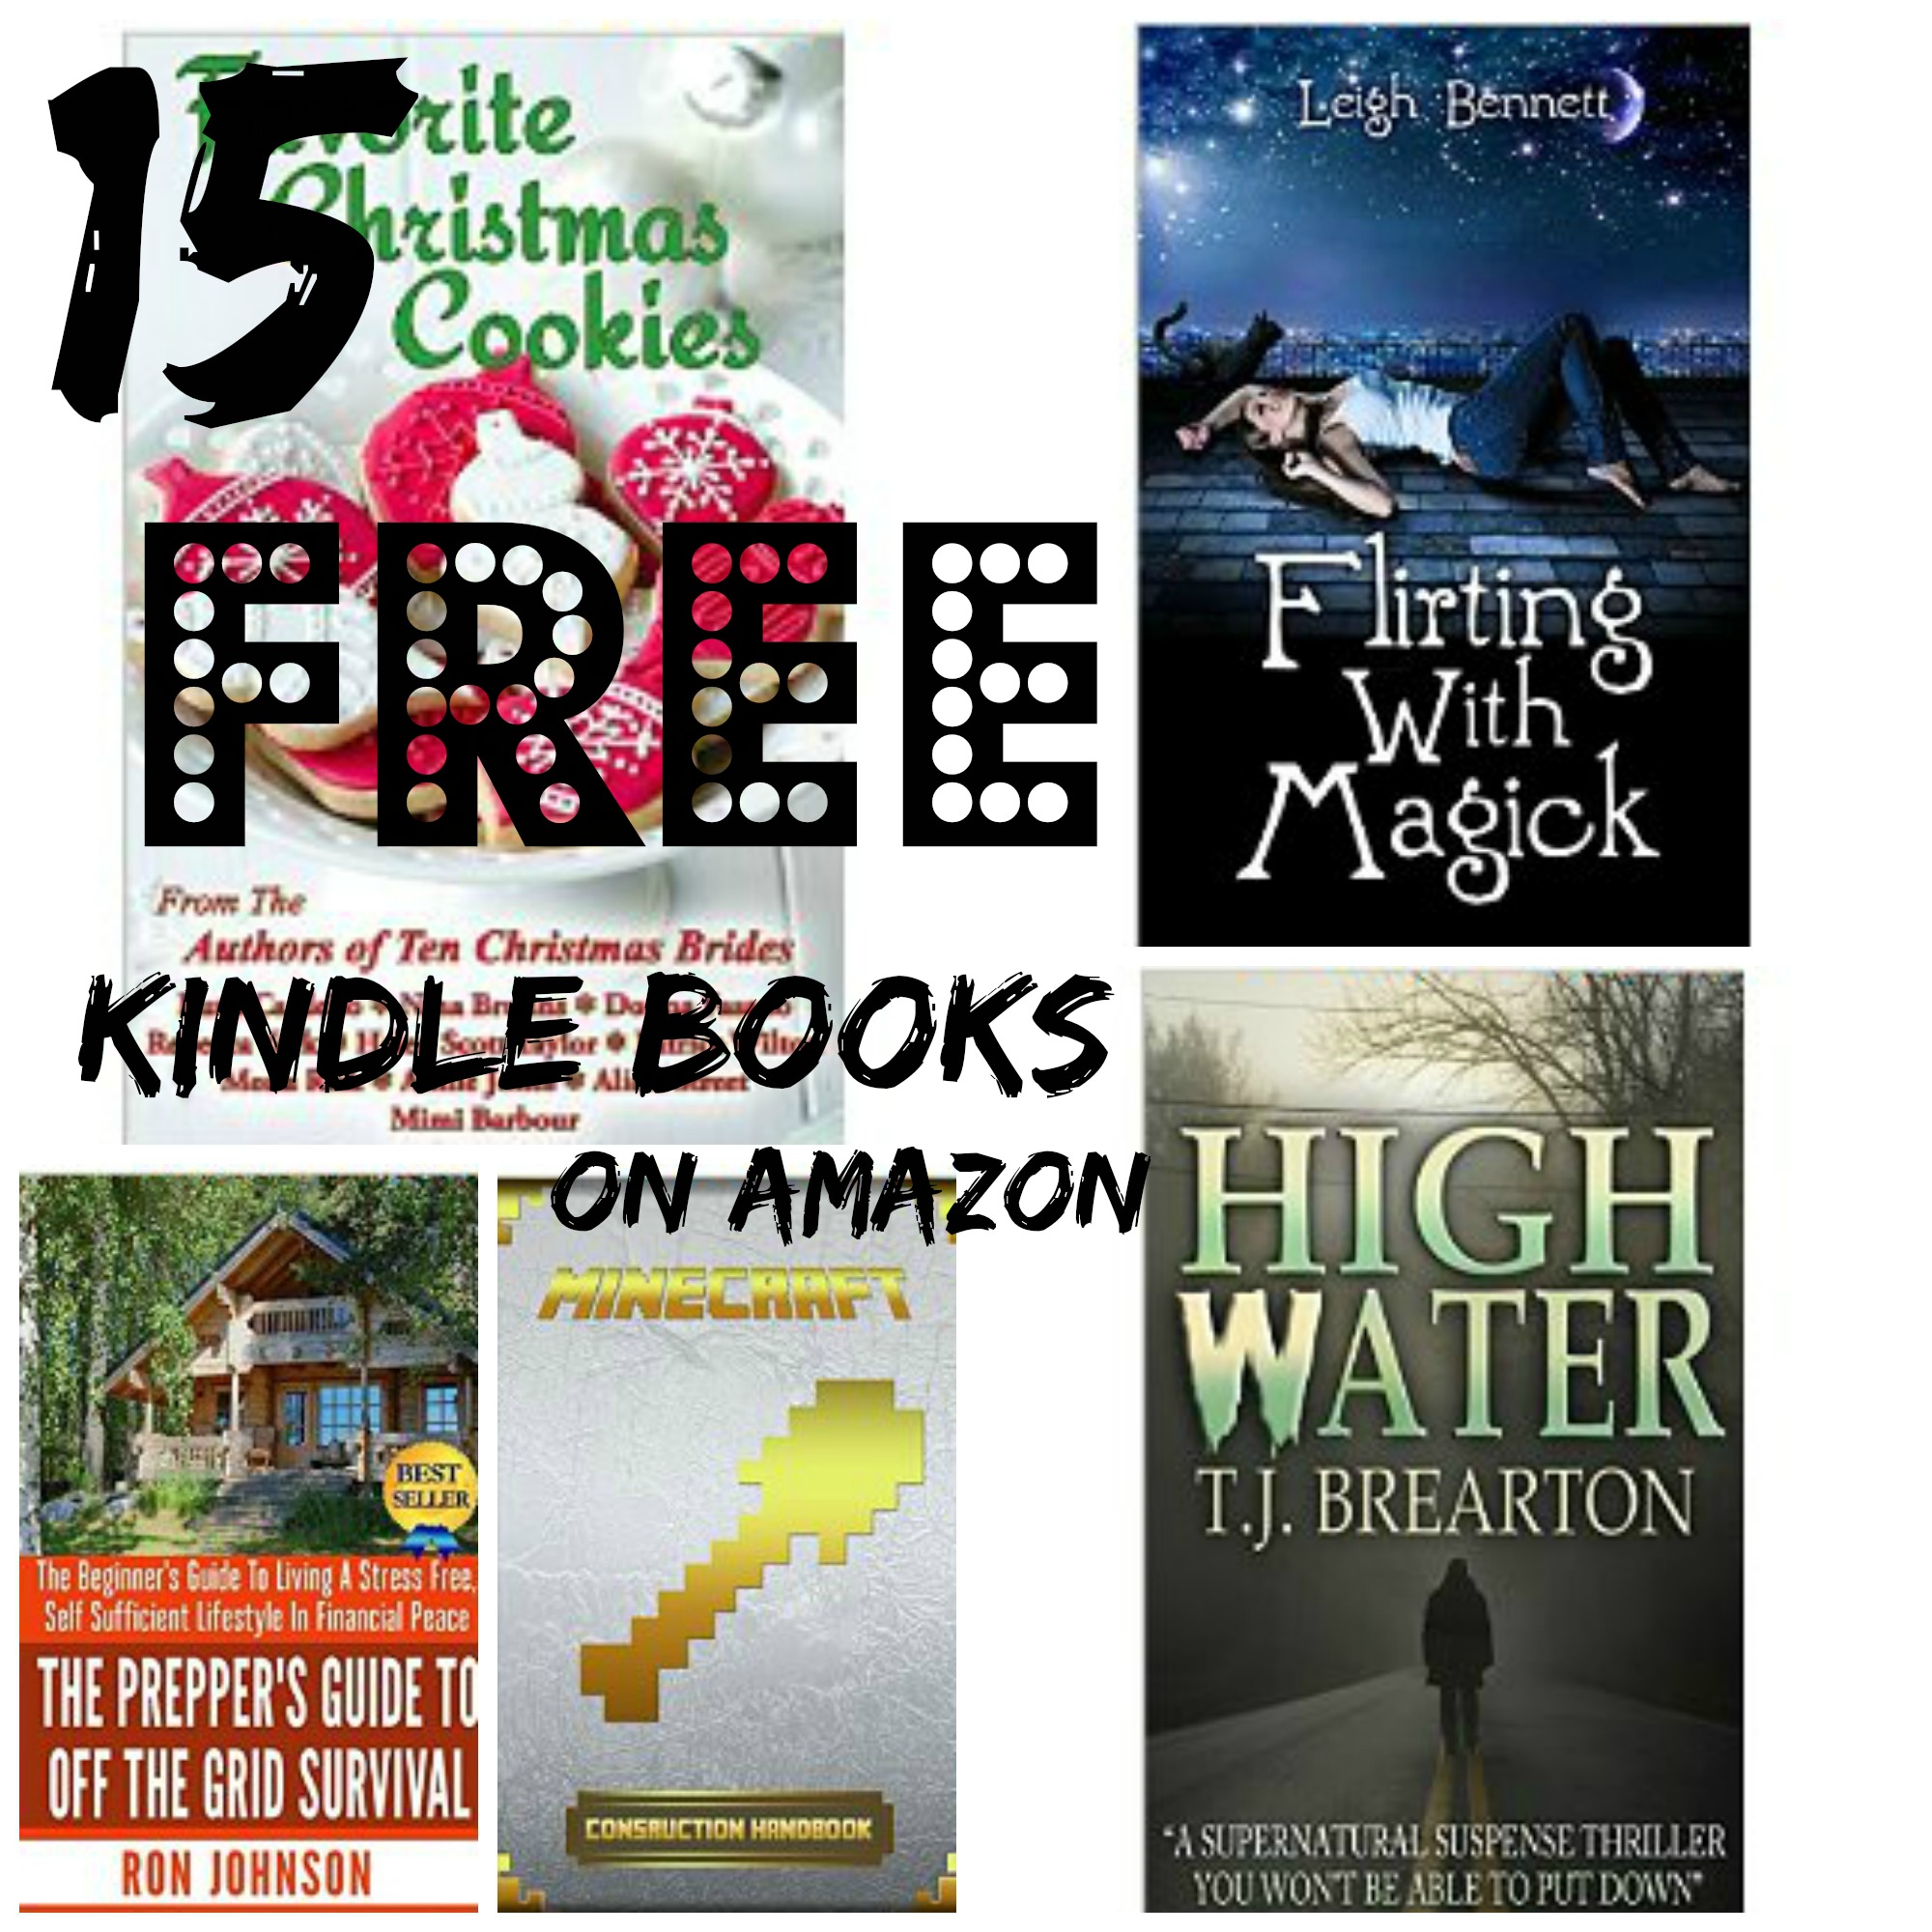 Amazon Kids Books Free Free and Cheap Kids Books for Kindle 2.28.15